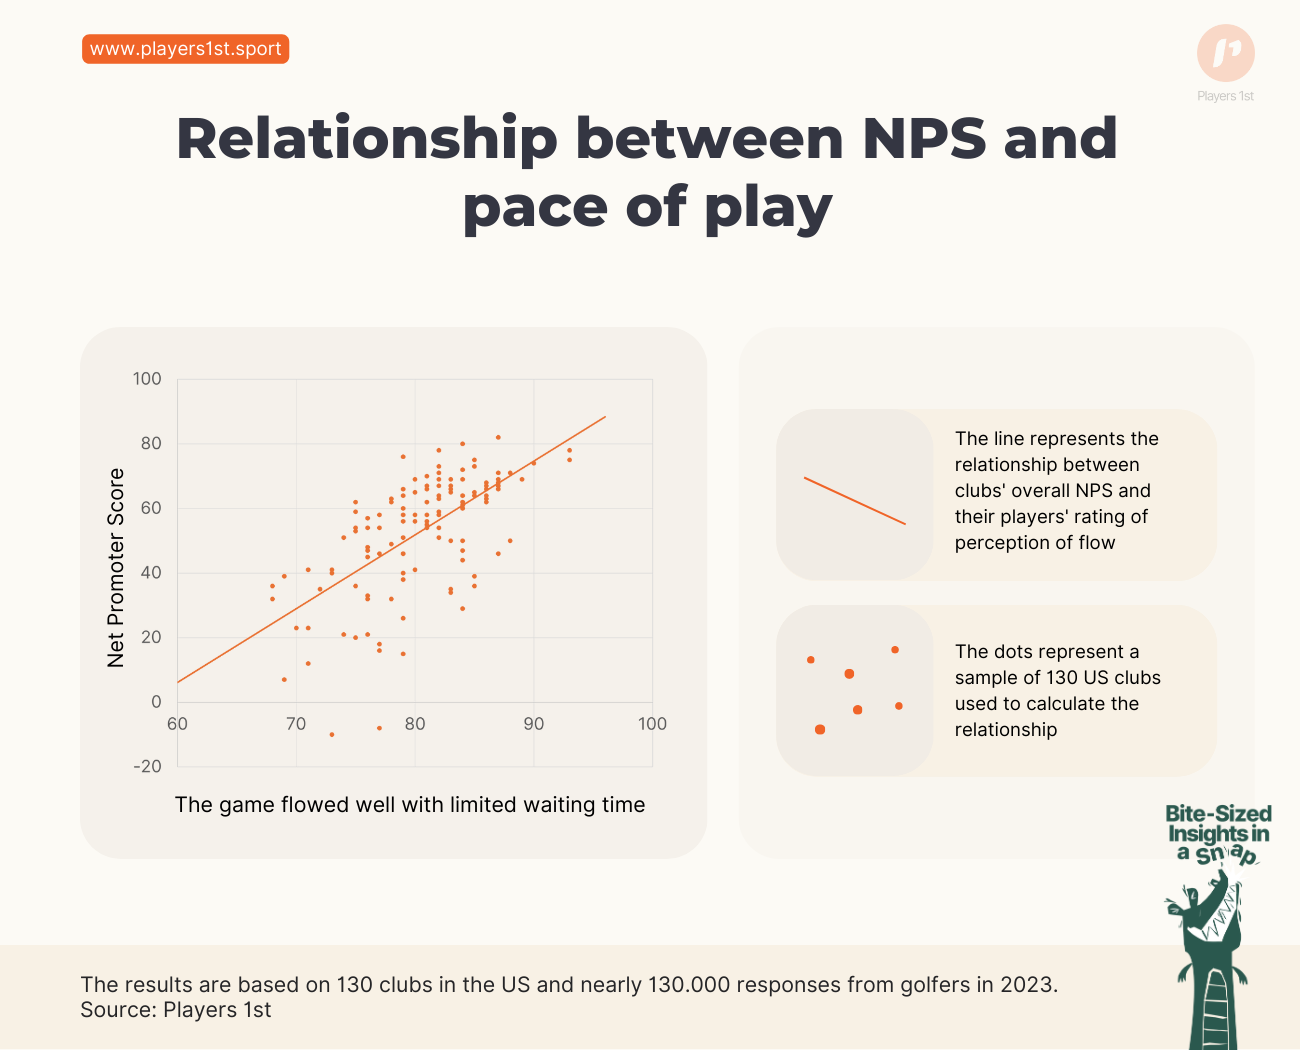 Figure 1: The relationship between clubs Net Promoter Score and the golfers' perception of flow. The results are based on 130 clubs in the US and nearly 130.000 responses from golfers in 2023. Source: Players 1st.